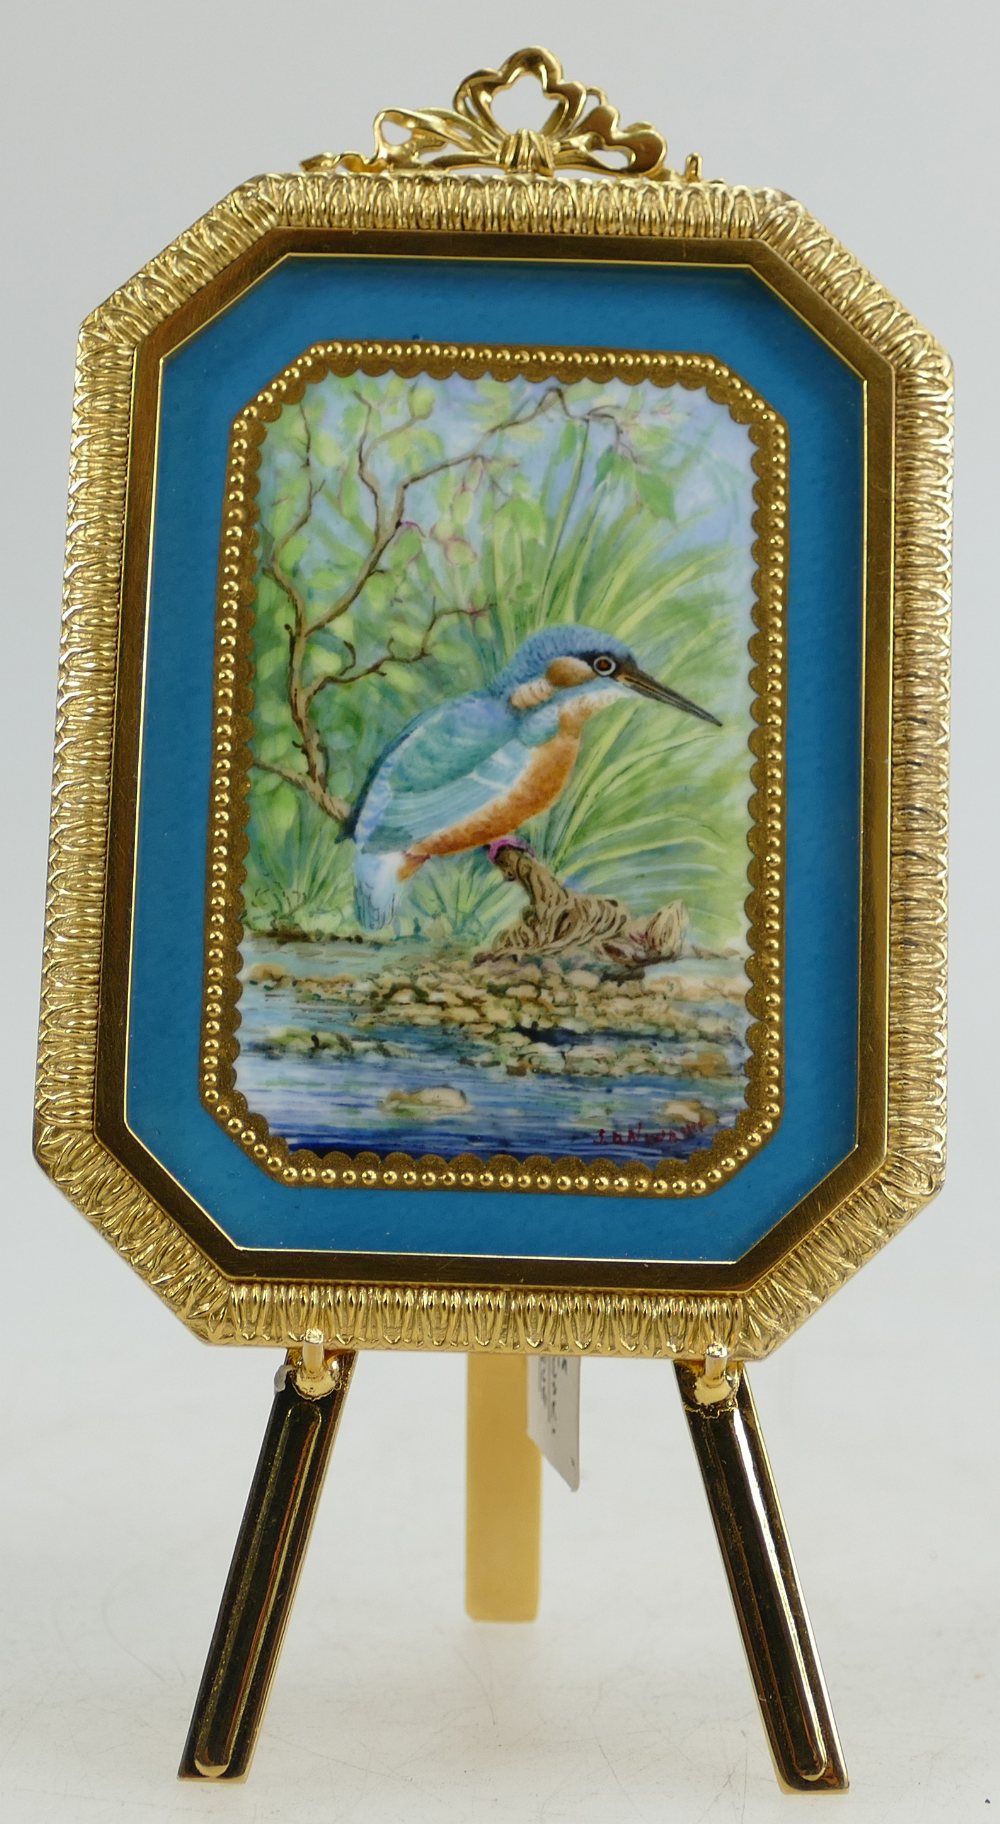 Lynton Porcelain company miniature plaque handpainted with a Kingfisher by S D Nowaki,